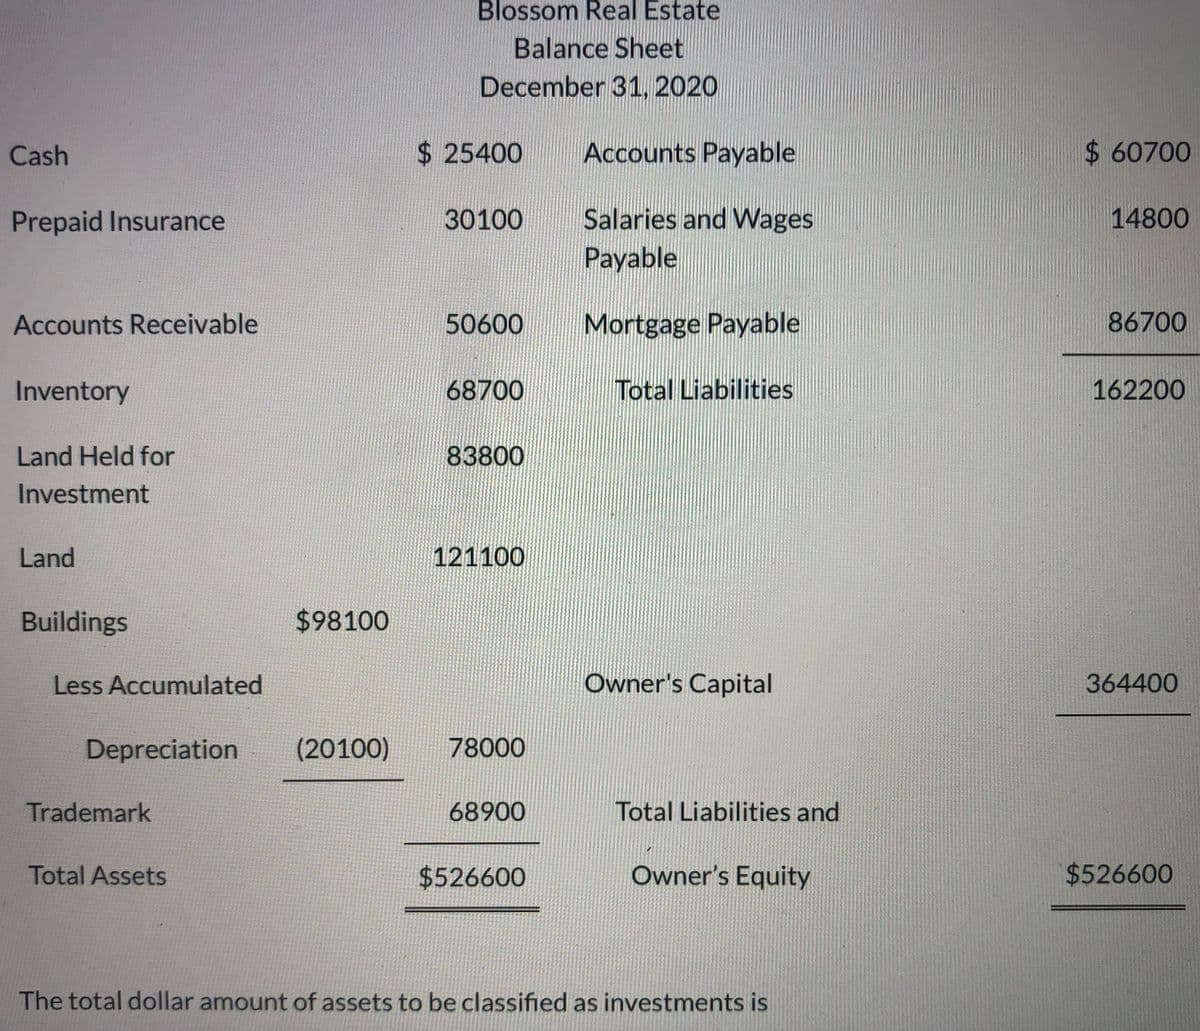 Blossom Real Estate
Balance Sheet
December 31, 2020
Cash
$ 25400
Accounts Payable
$460700
Salaries and Wages
Payable
Prepaid Insurance
30100
14800
Accounts Receivable
50600
Mortgage Payable
86700
Inventory
68700
Total Liabilities
162200
Land Held for
83800
Investment
Land
121100
Buildings
$98100
Less Accumulated
Owner's Capital
364400
Depreciation
(20100)
78000
Trademark
68900
Total Liabilities and
Total Assets
$526600
Owner's Equity
$526600
The total dollar amount of assets to be classified as investments is
